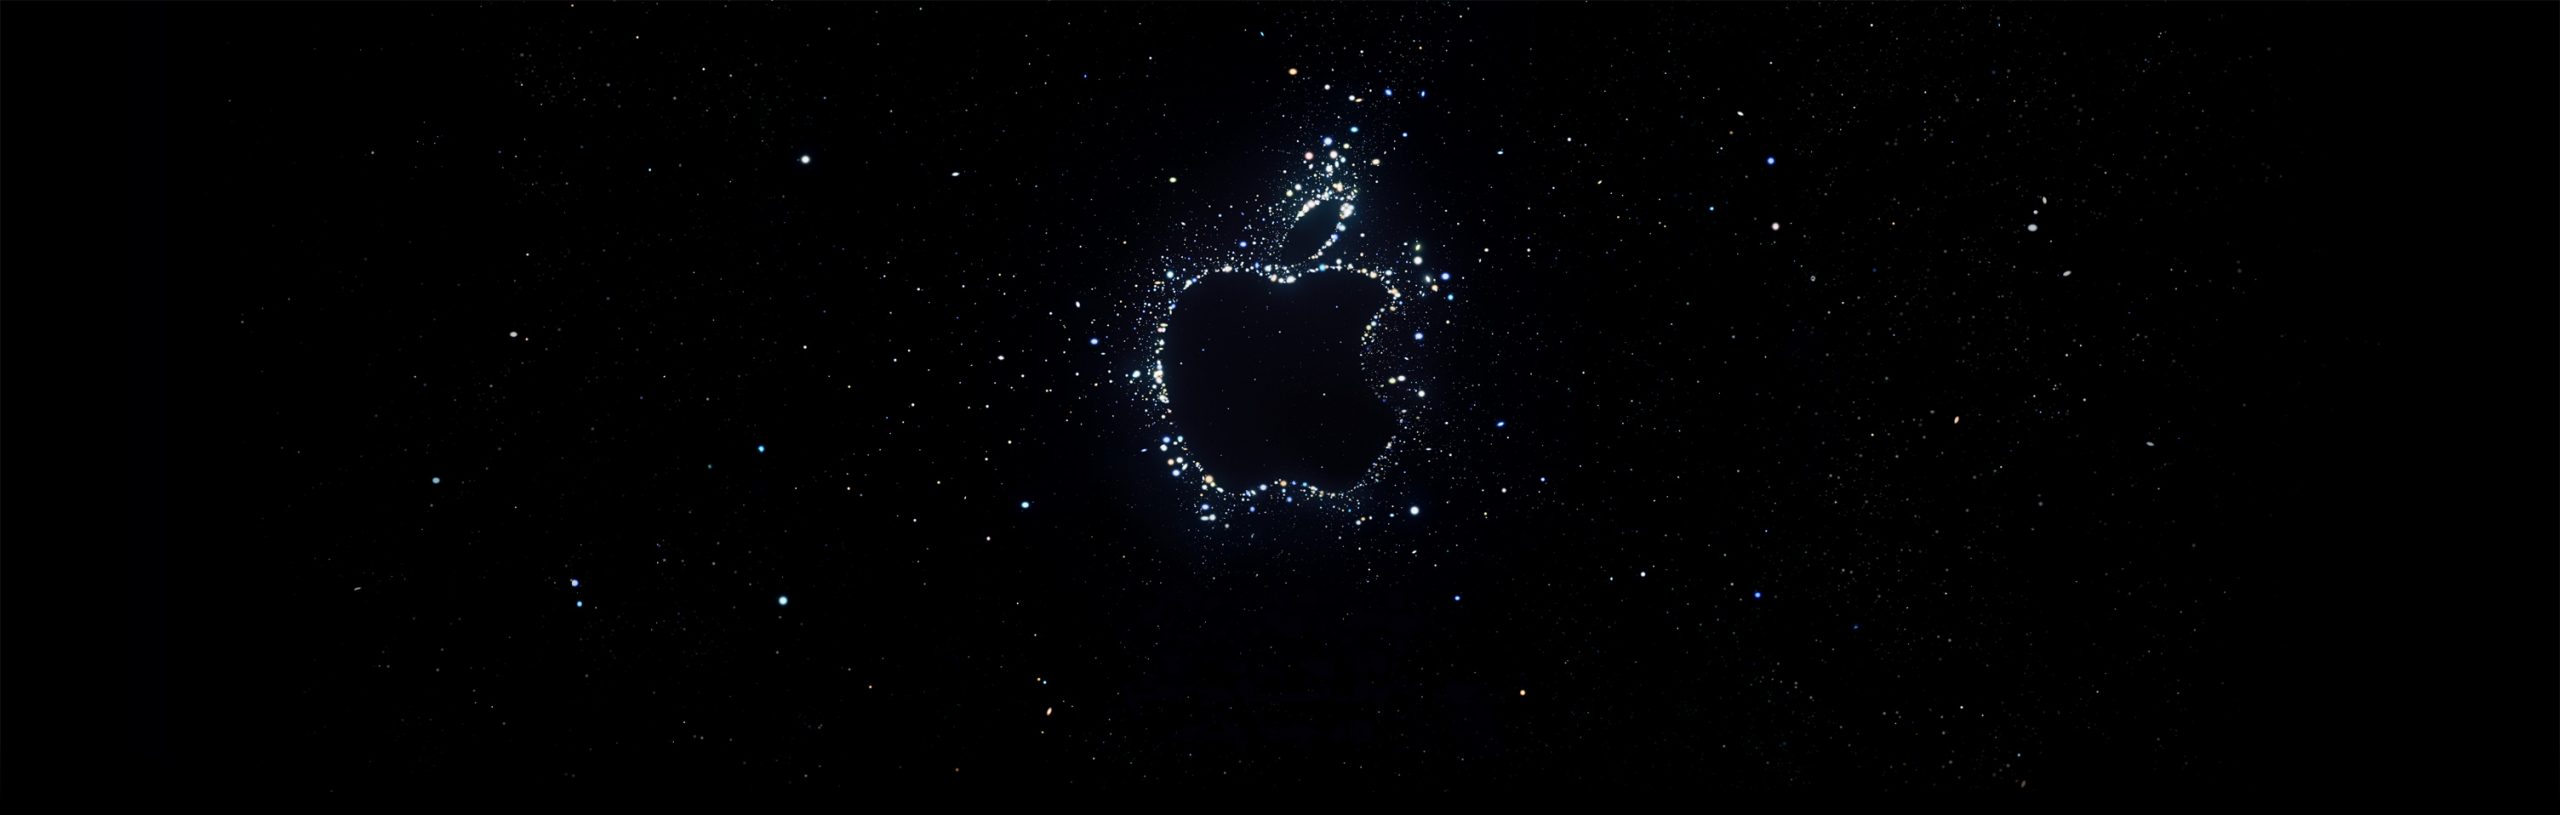 Apple Event 7th September 2022. What do we expect?